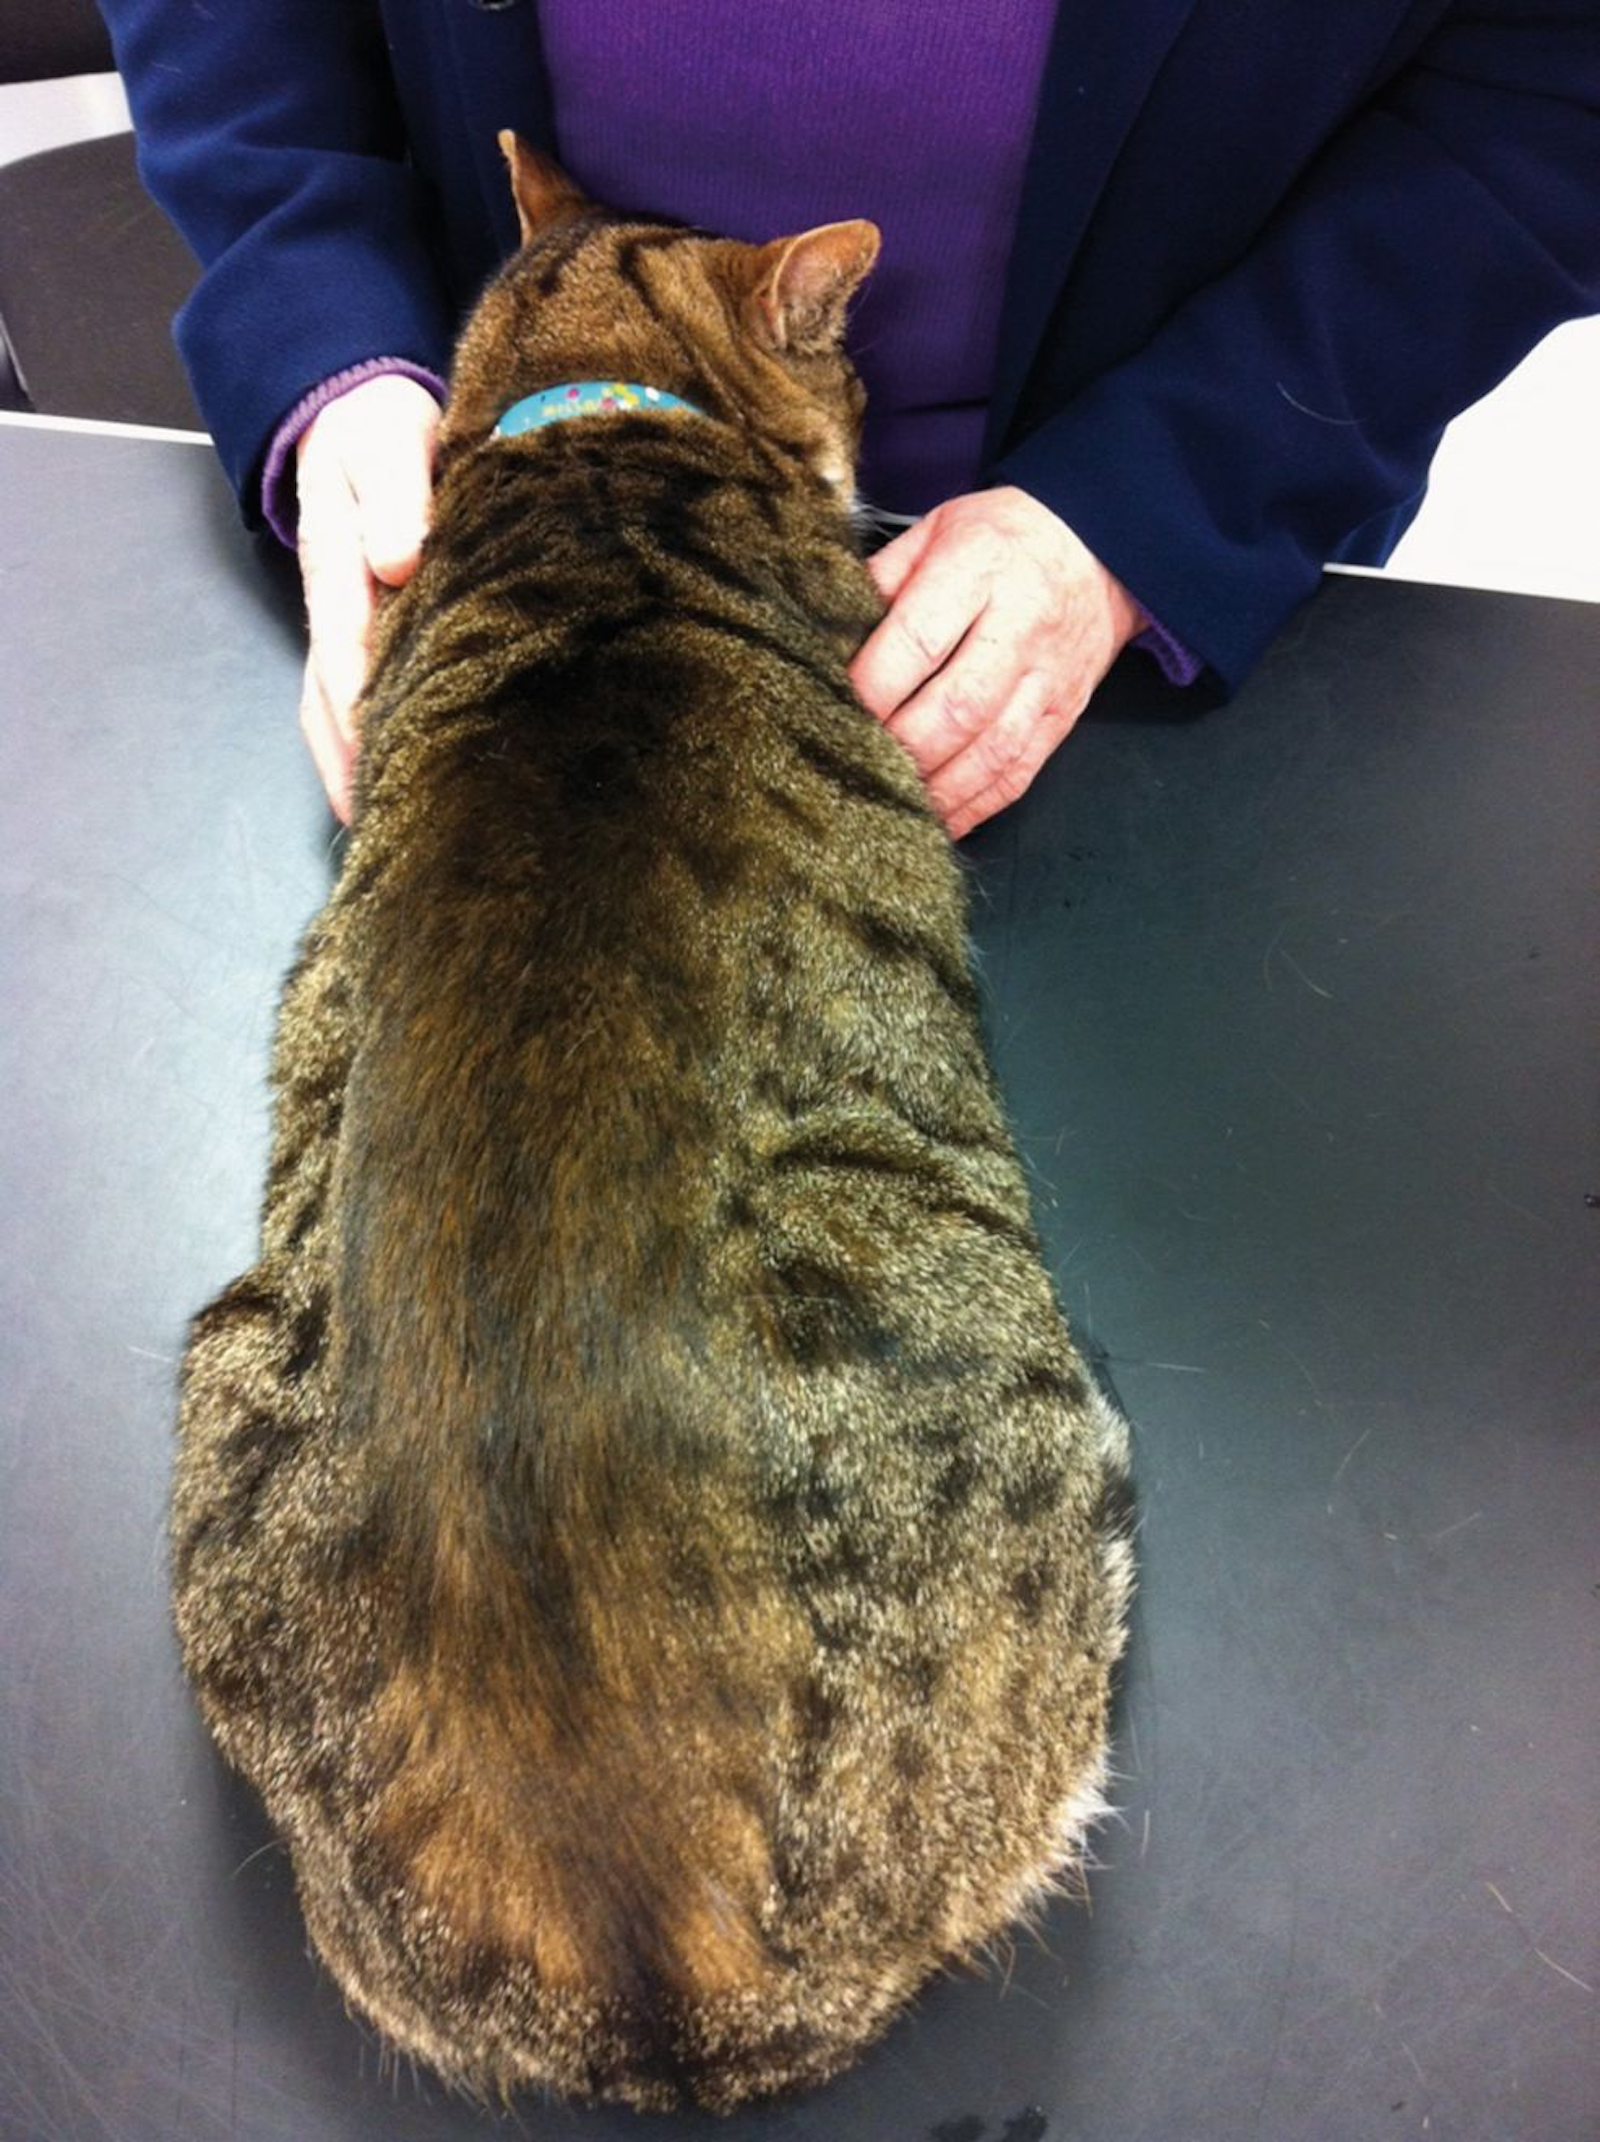 The same cat as in Figure 9 after treatment with ciclosporin for 11 weeks.